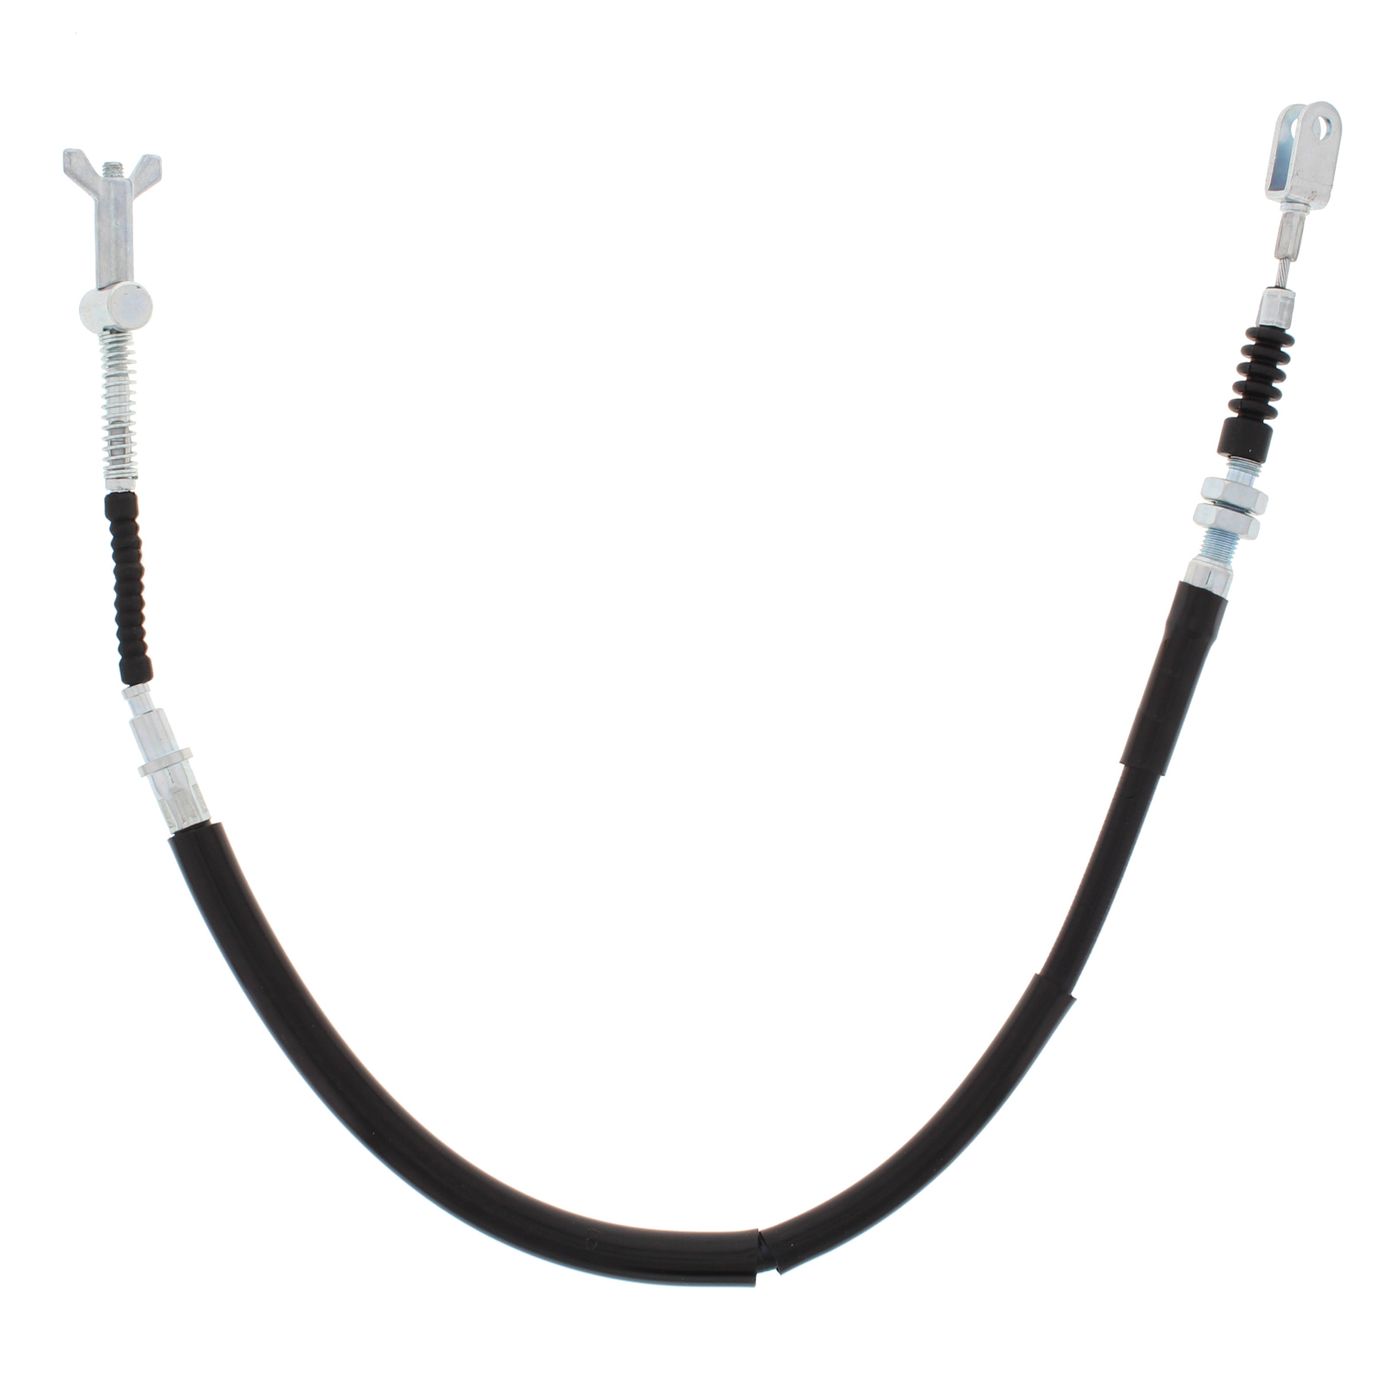 Wrp Brake Cables - WRP454037 image